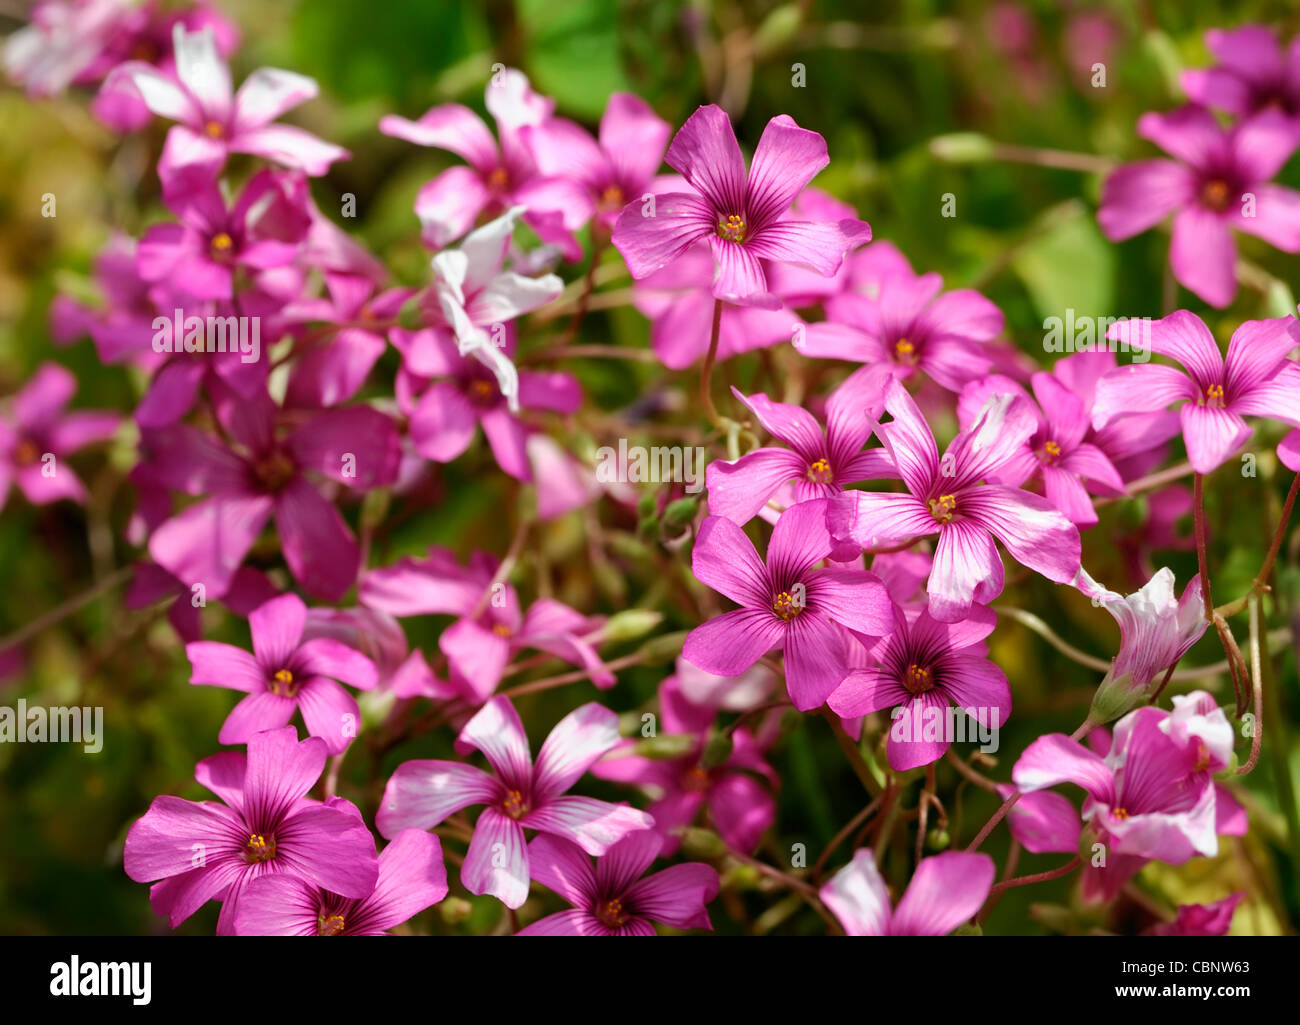 Oxalis articulata ssp rubra red woodsorrel windowbox sorrel herbaceous perennial pink purple flowers blooms blossoms Stock Photo